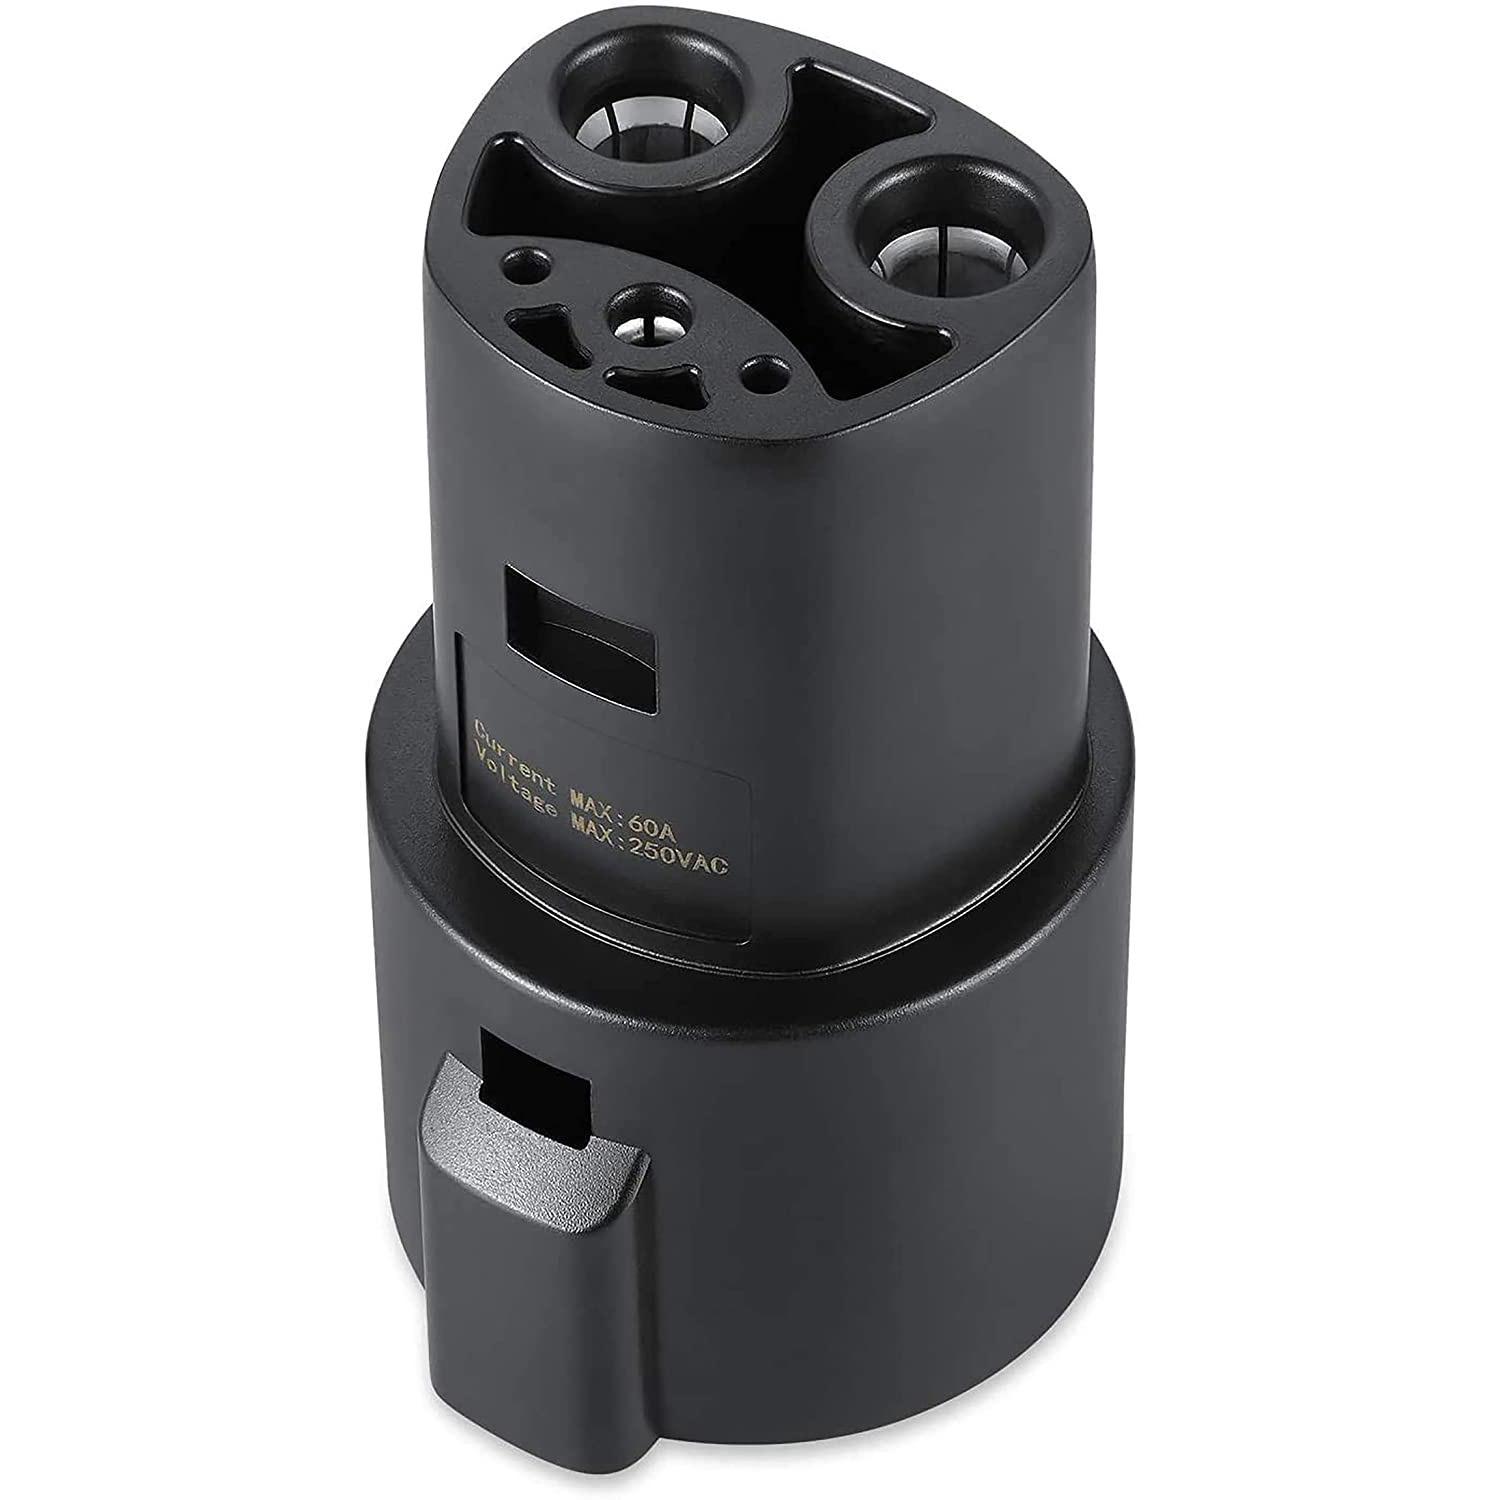 Tesla SAE J1772 Charging Adapter for $50 Shipped